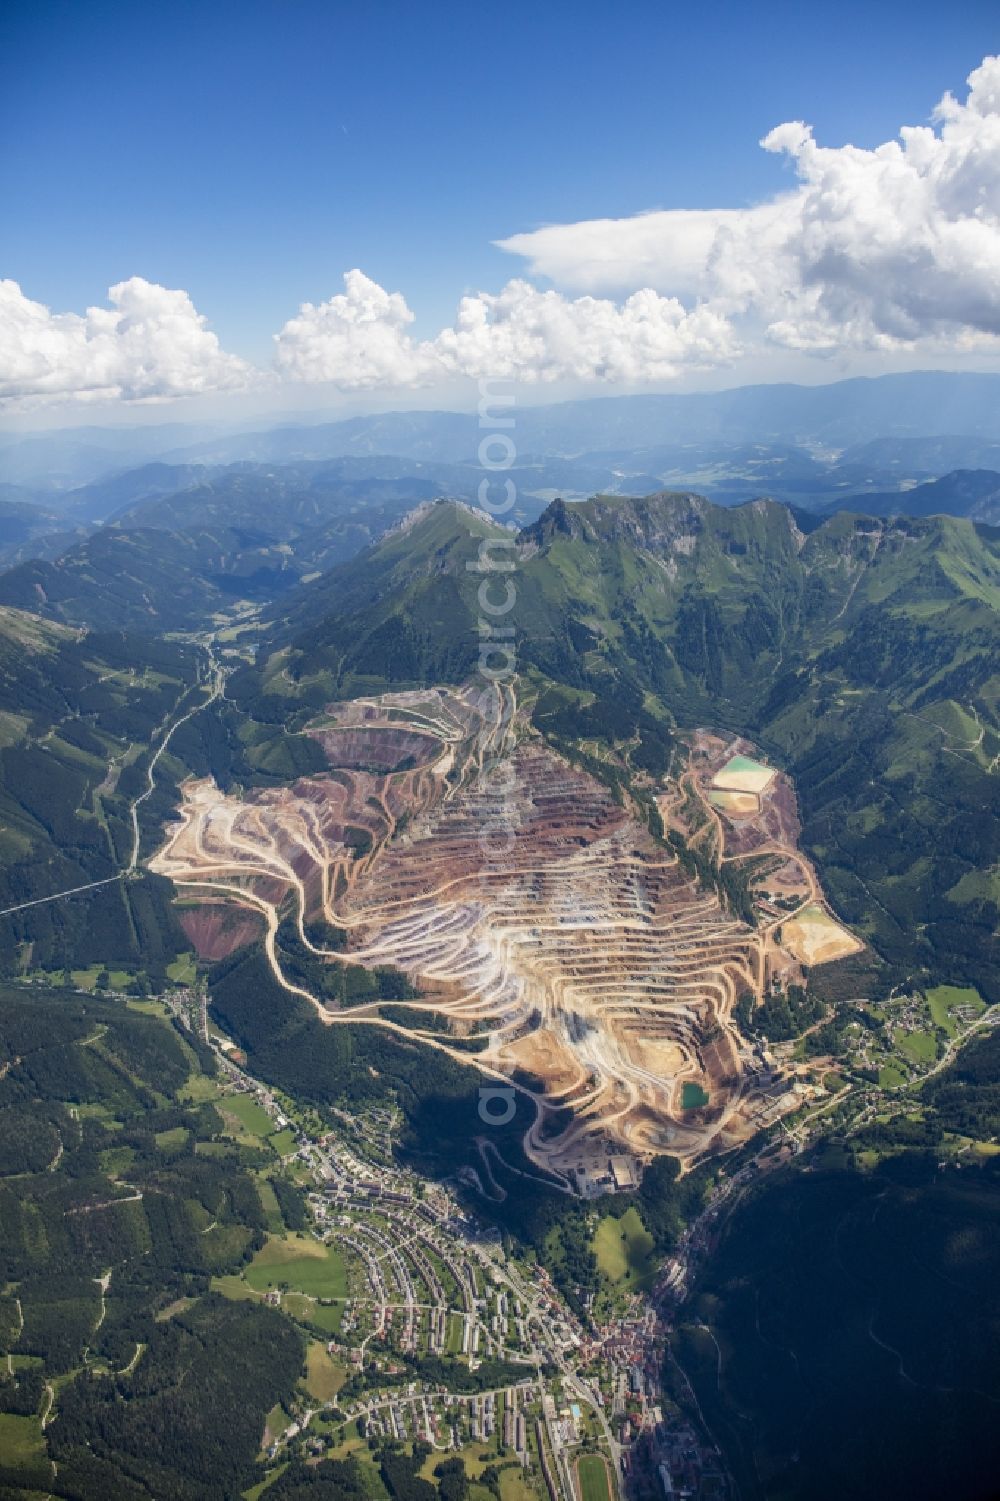 Eisenerz from the bird's eye view: Quarry for the mining and handling of iron ore in Eisenerz in Steiermark, Austria